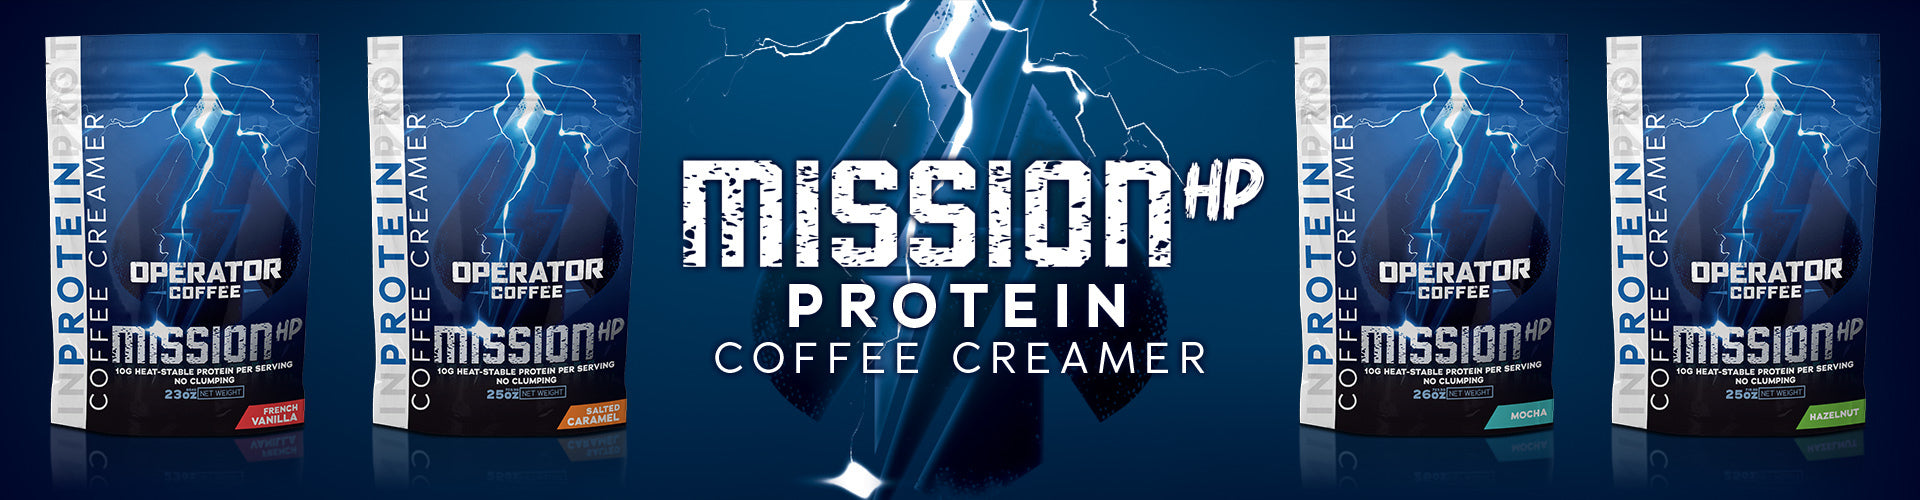 Promotional banner with four bags of protein creamer and Operator Coffee Logo. 